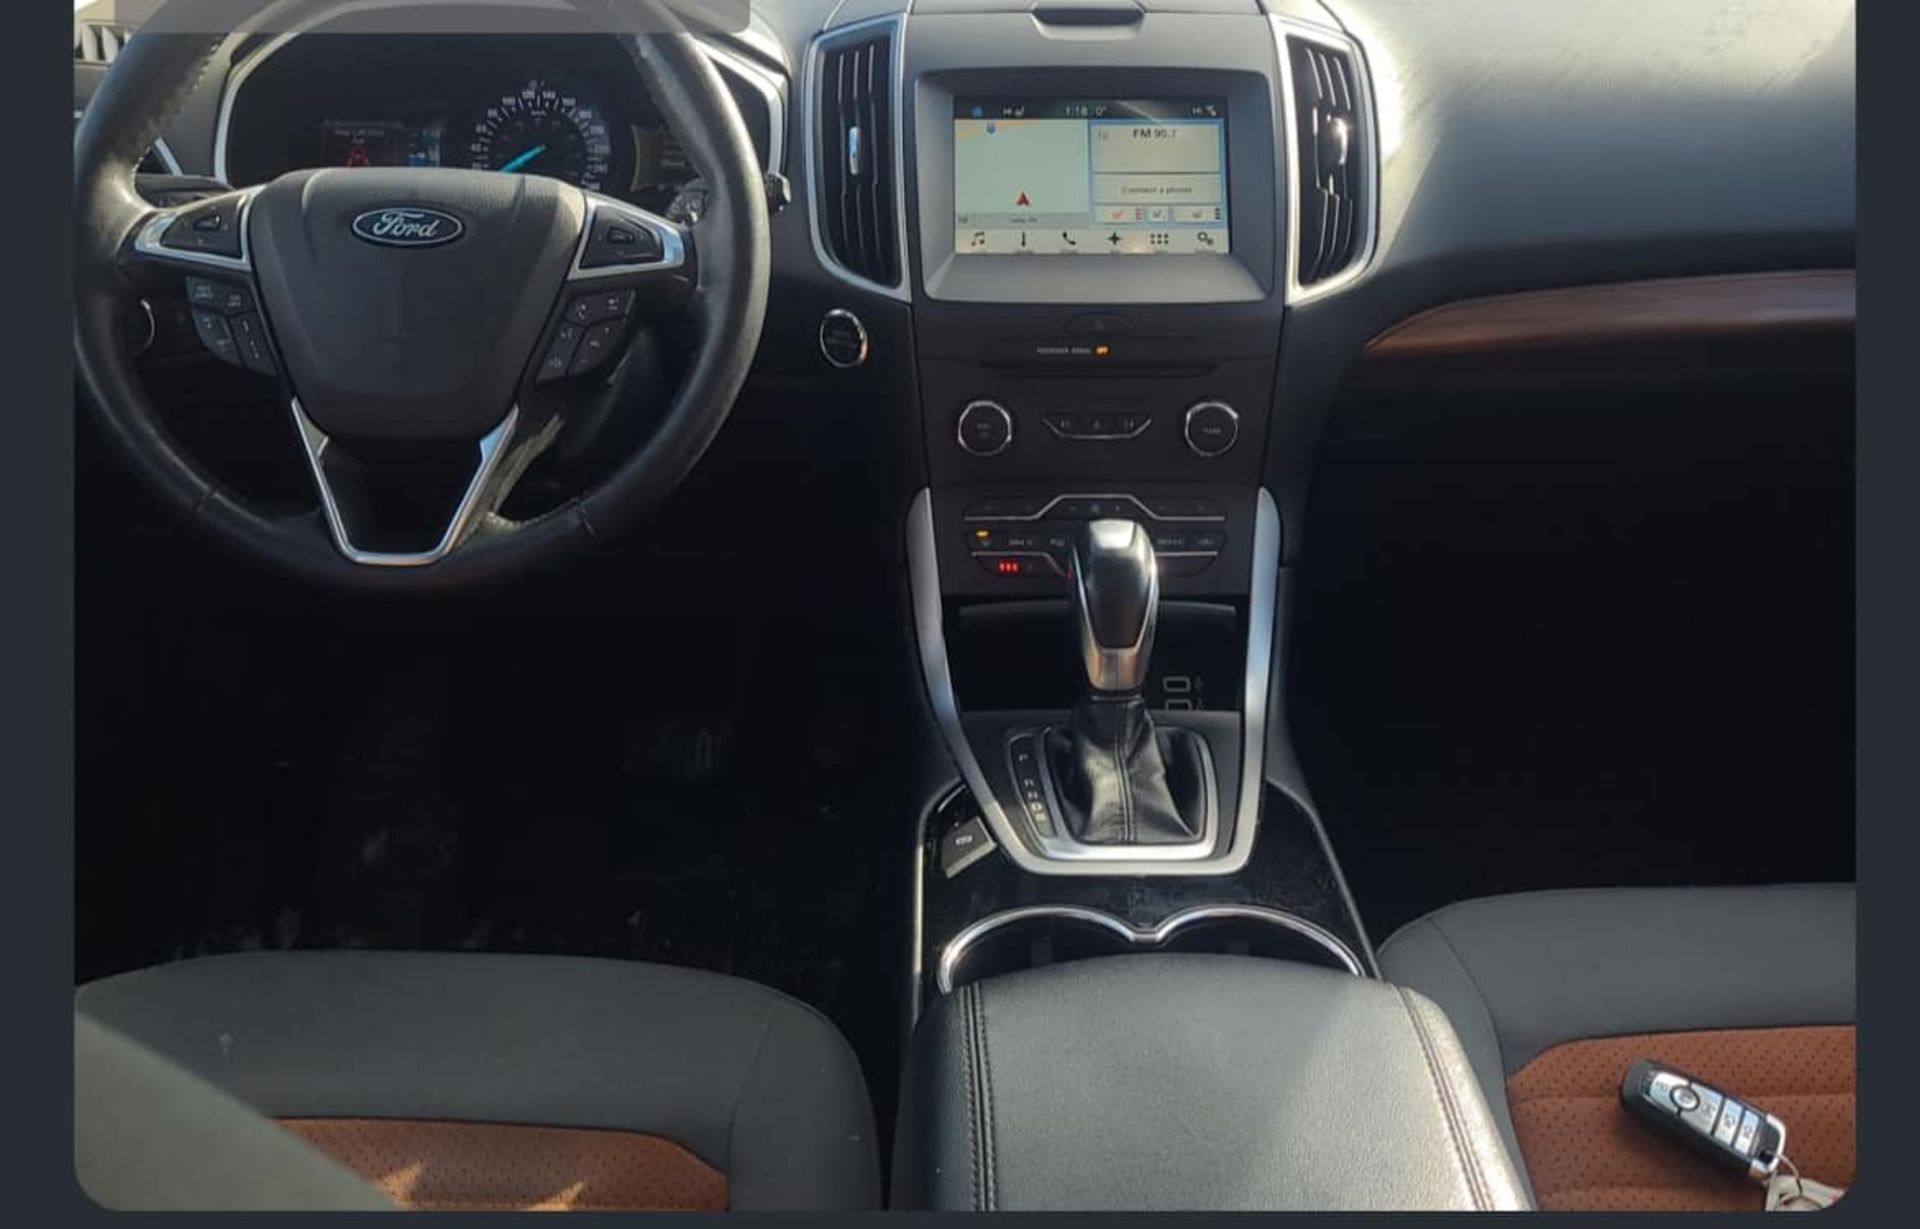 2018 FORD EDGE SEL - Image 4 of 5